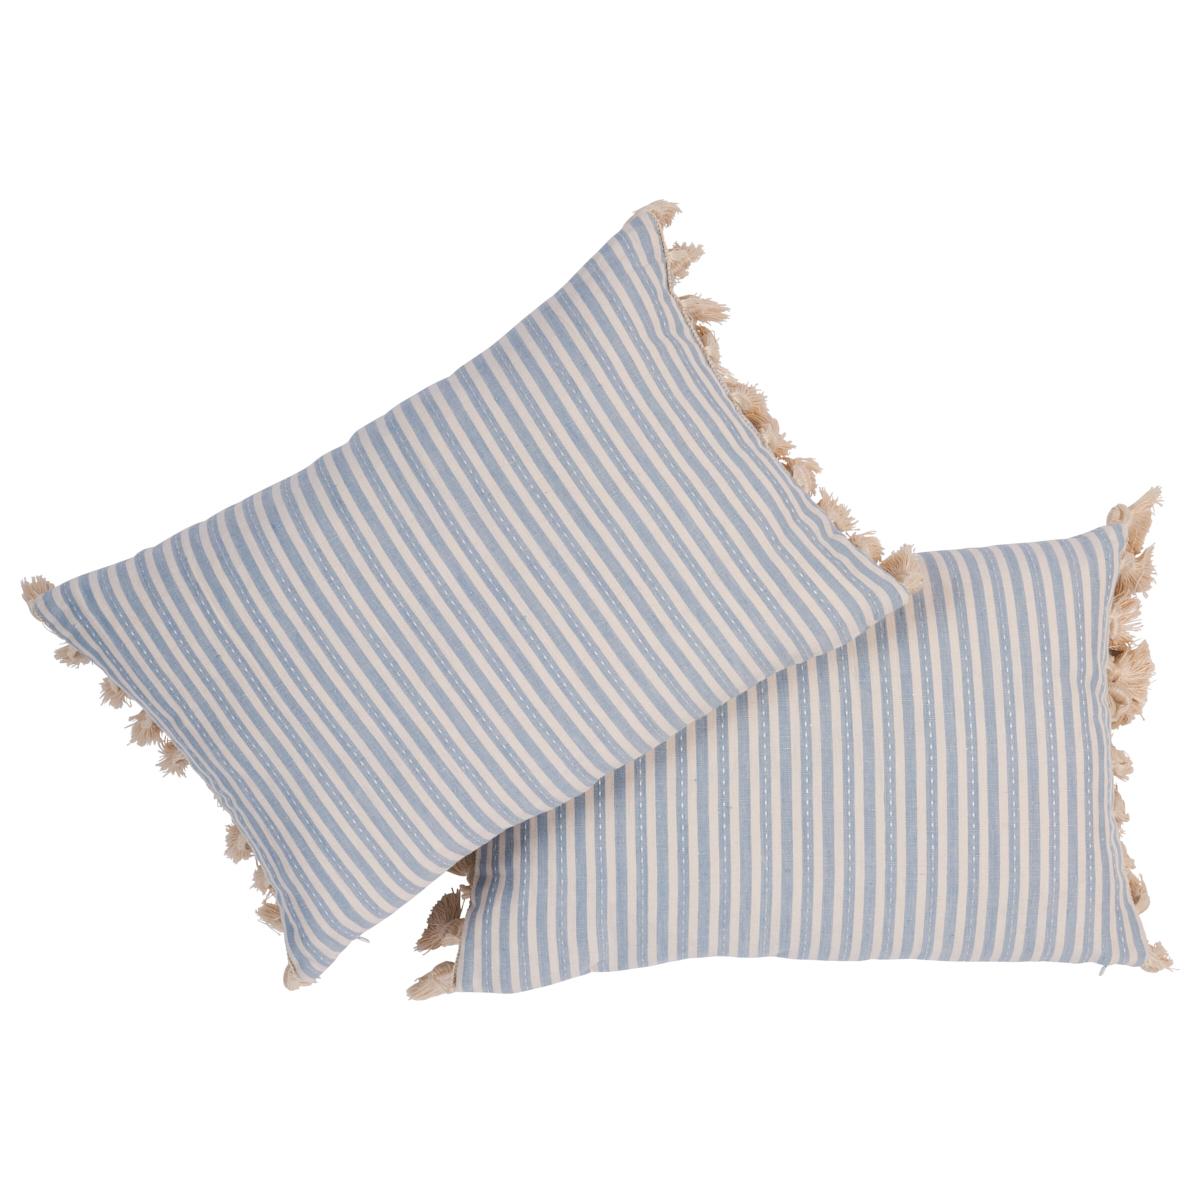 This pillow features Mathias Ticking Stripe with a knife edge finish on top and bottom. Printed on a linen-hemp blend with a running-stitch detail, Mathis Ticking Stripe in sky is an interesting, textural take on traditional mattress ticking. Sides